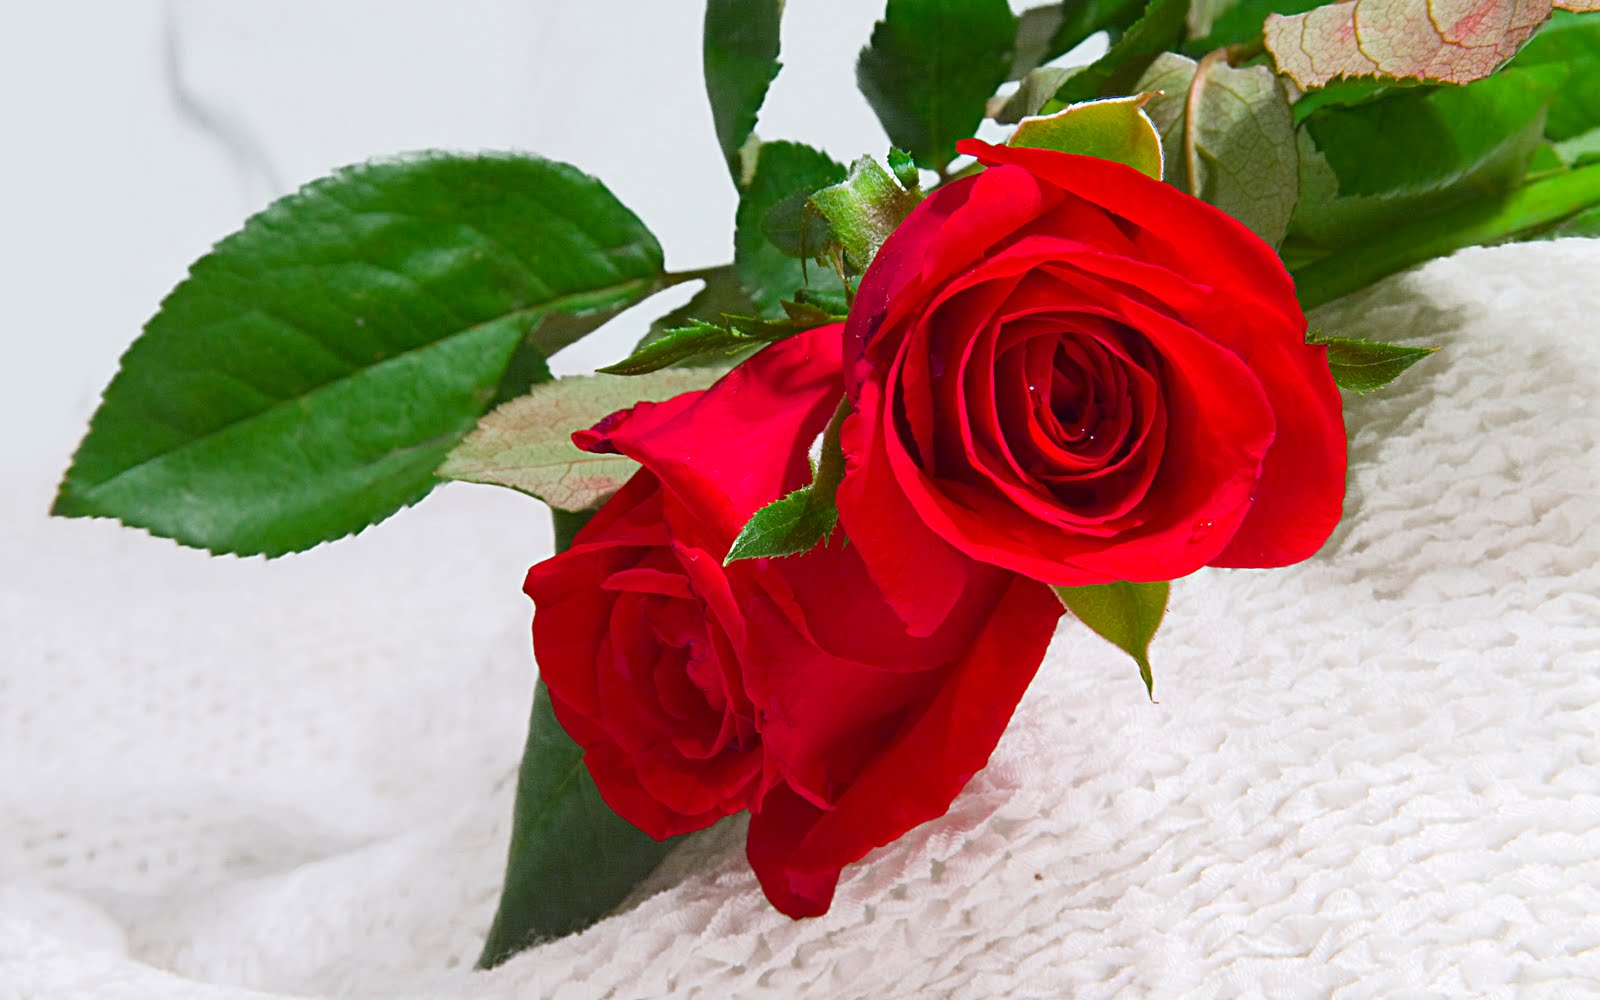 Red Rose Flower - Flower HD Wallpapers, Images, PIctures ...